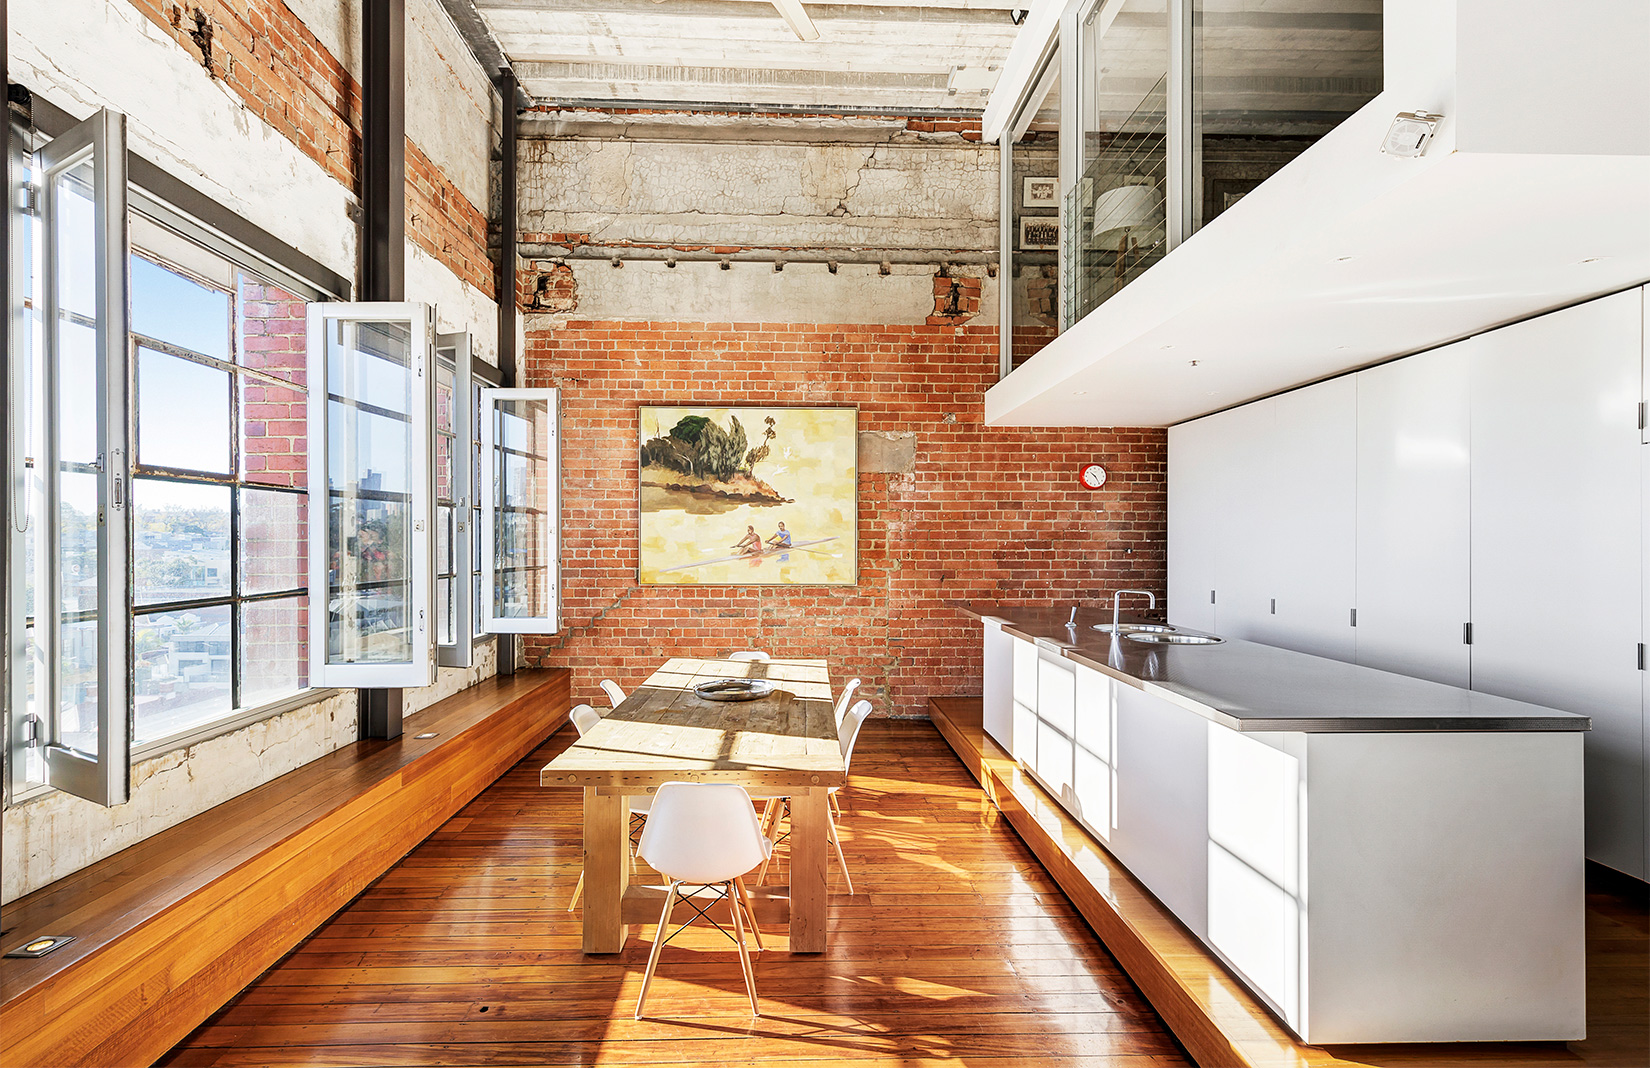 Property of the week: a storied Melbourne warehouse conversion